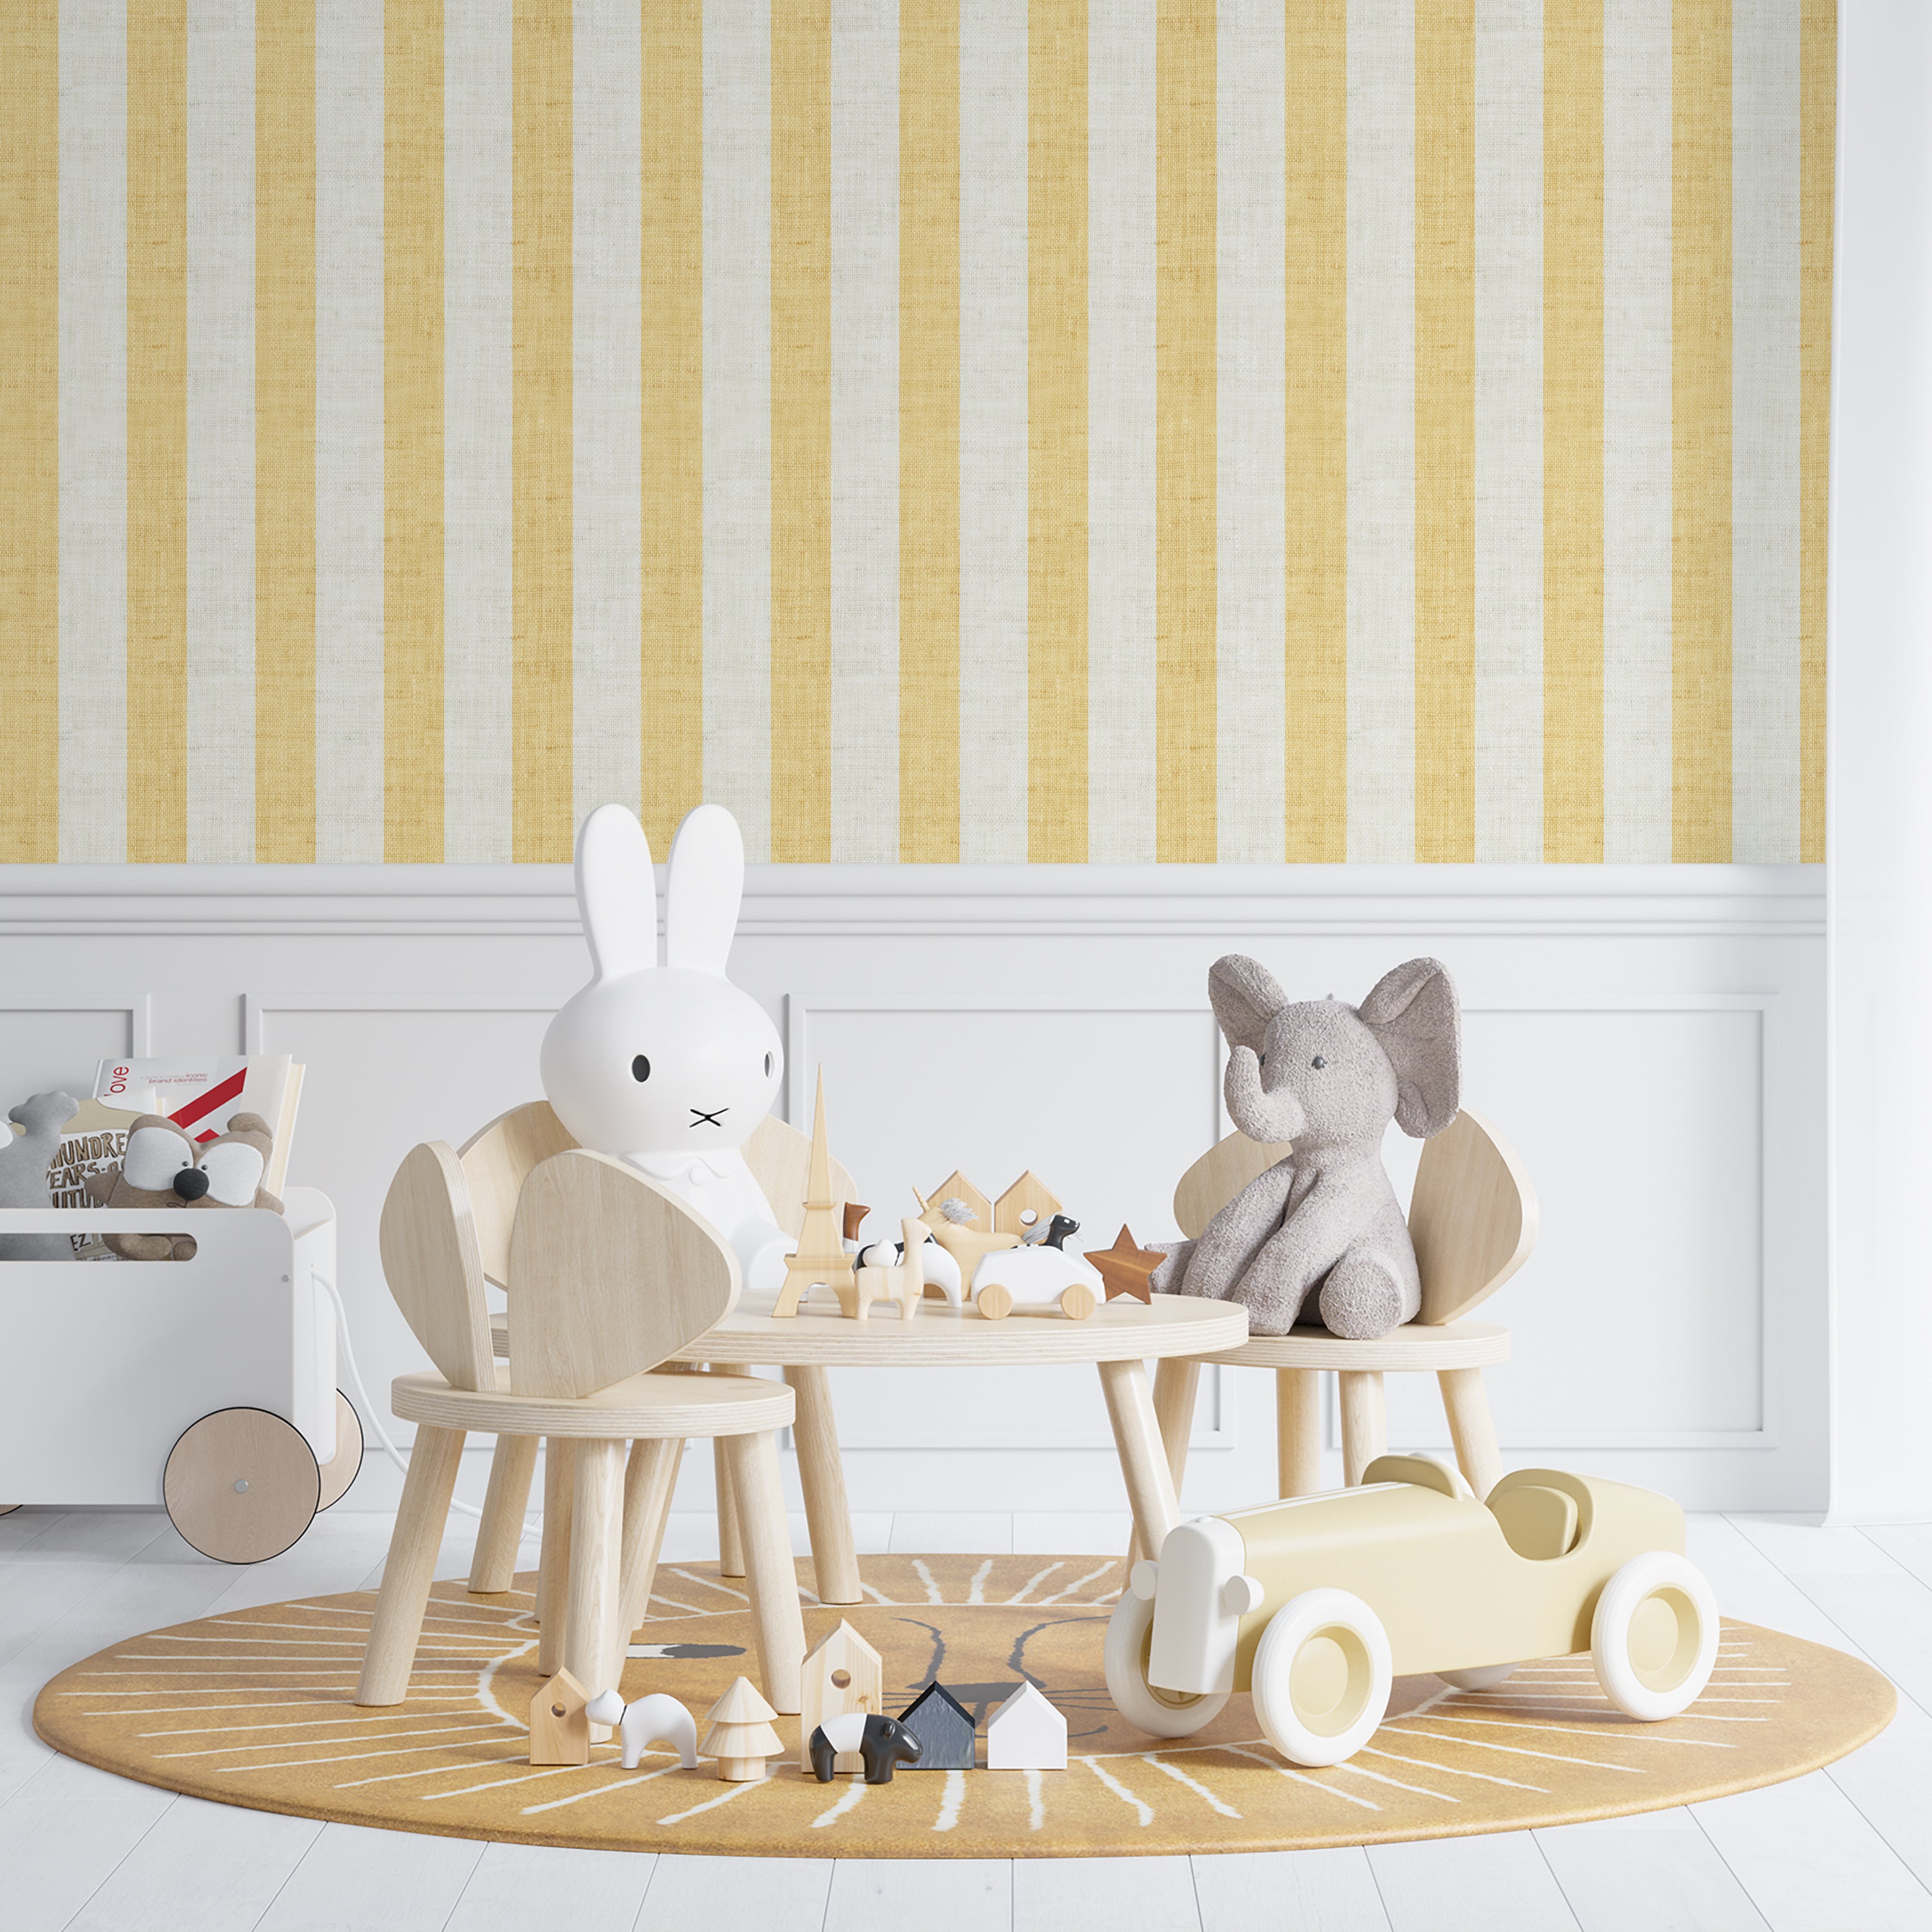 Child-friendly room setting displaying Ticking Fabrics 7 Wallpaper with vertical yellow and cream stripes. The scene includes a wooden children’s table with toys and stuffed animals, emphasizing the wallpaper’s suitability for lively and playful interiors